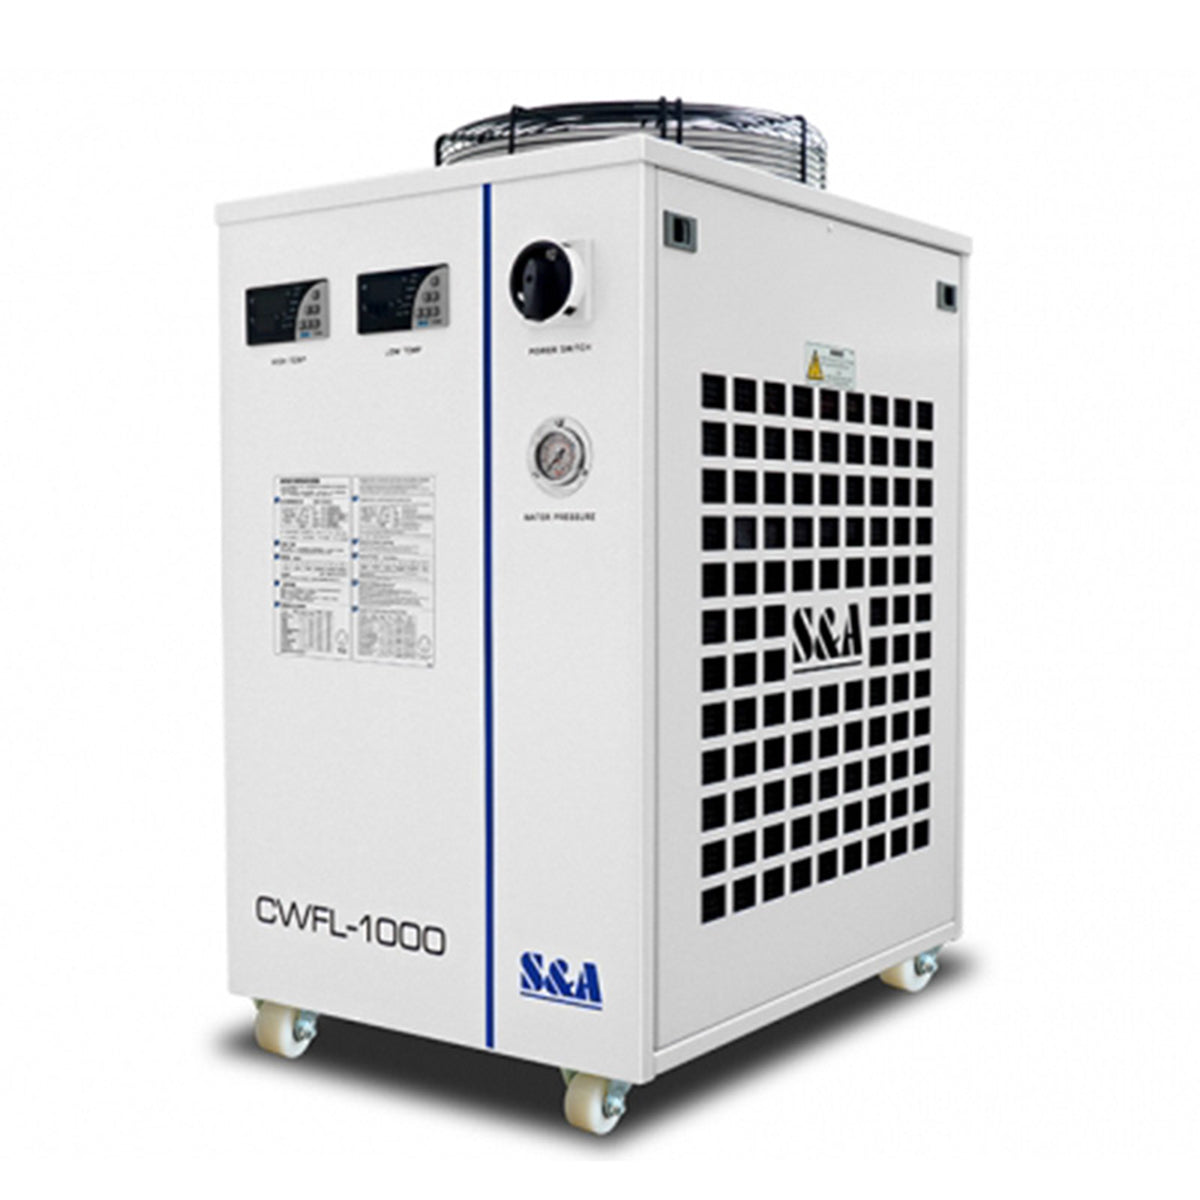 Startnow Industry Water Chiller CWFL-1000AN & 1000BN S&A 50/60HZ With Dual Temperature Control Systerm for Fiber Laser Machine